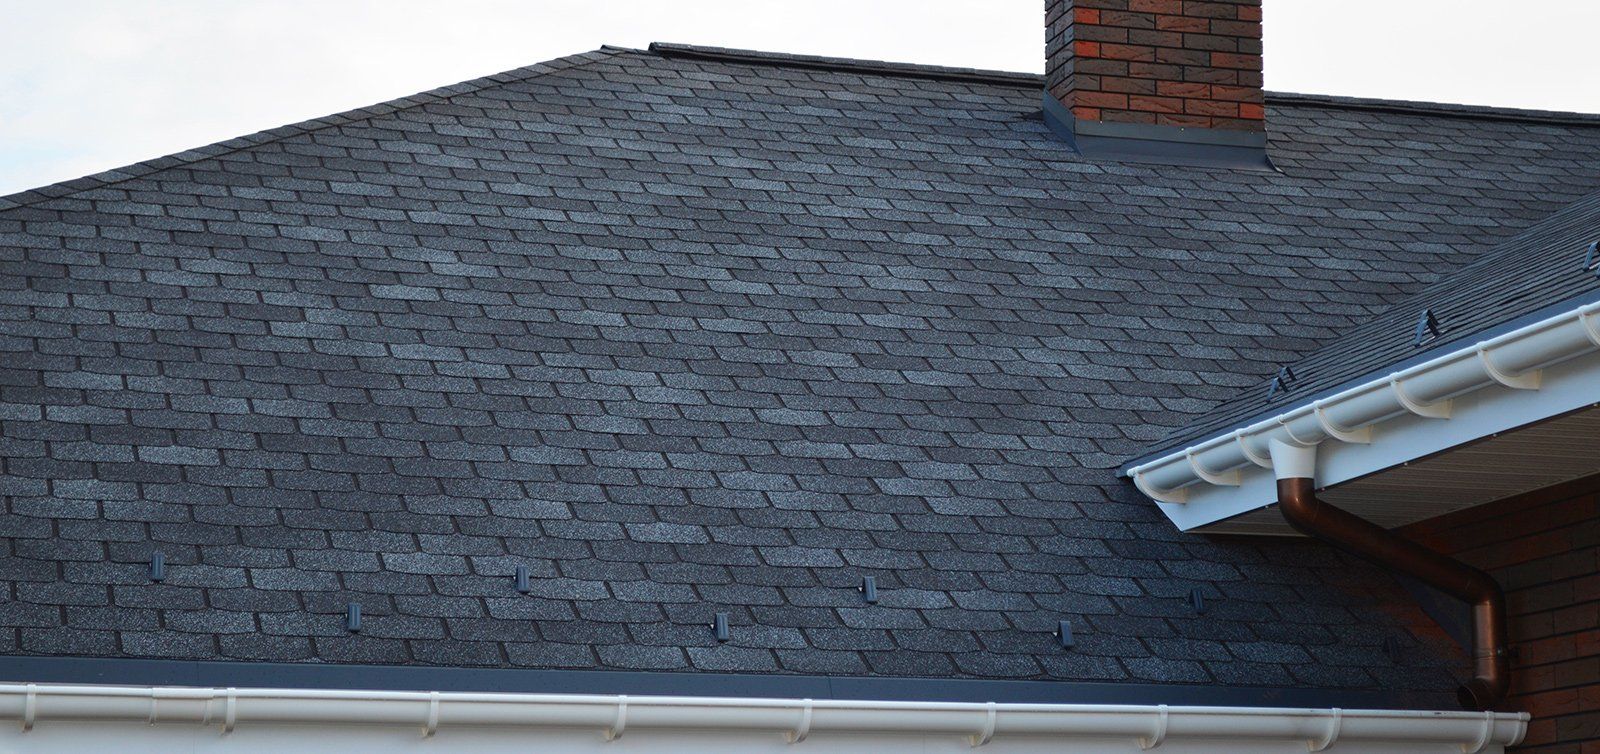 Residential house roof